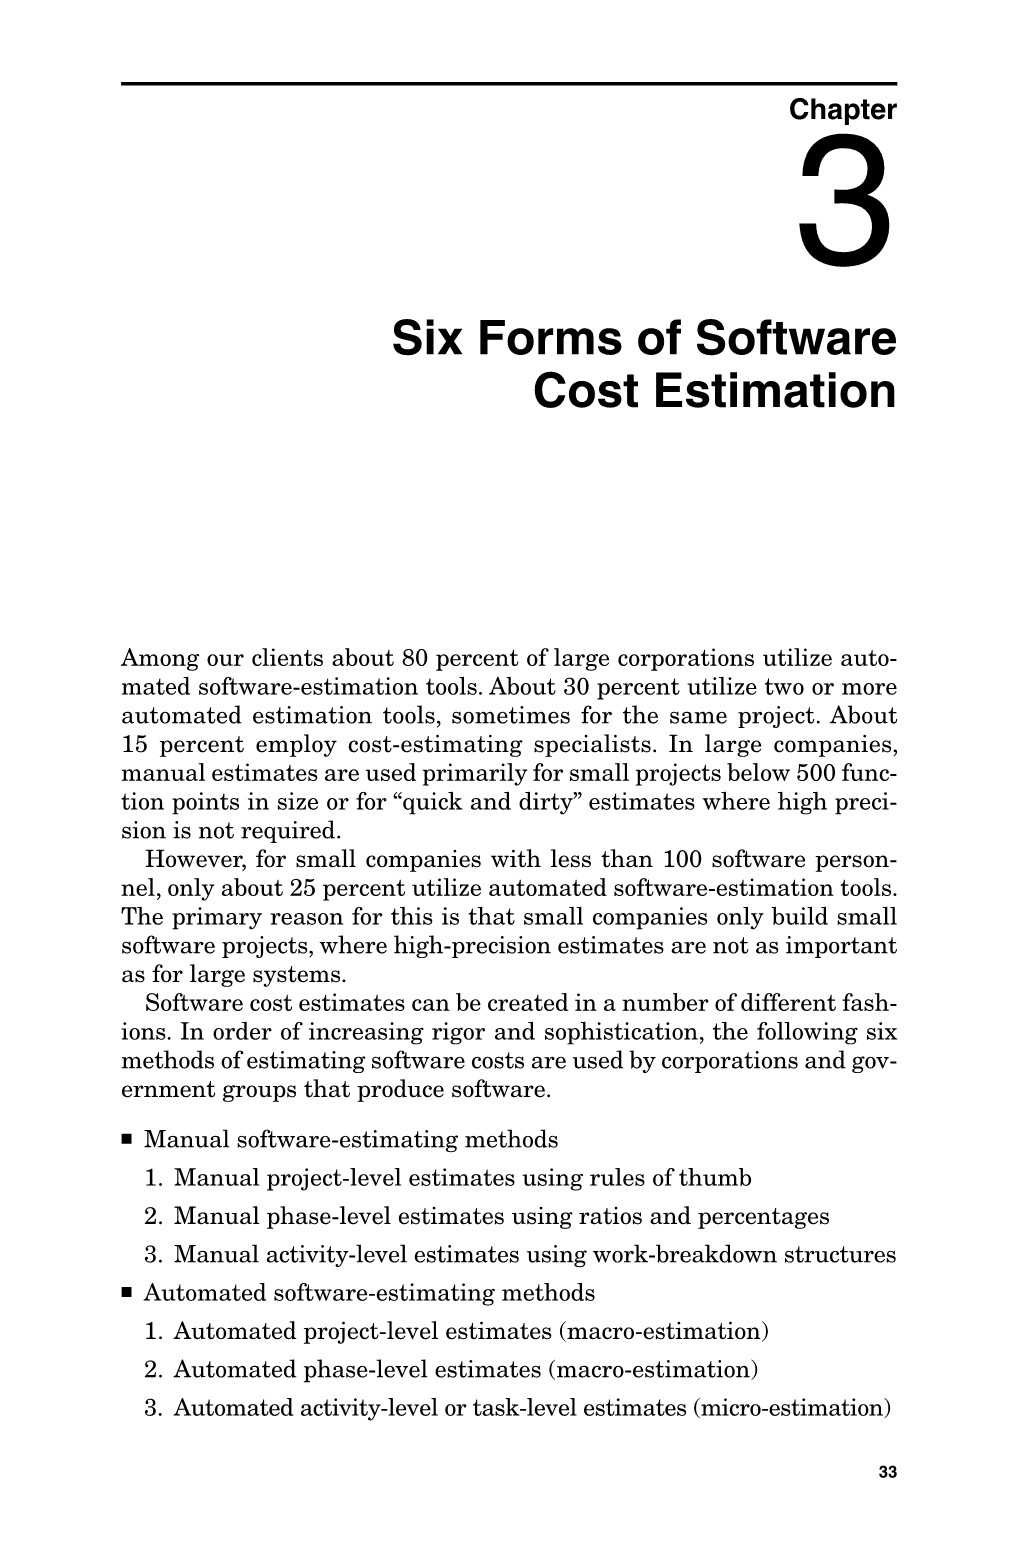 Six Forms of Software Cost Estimation